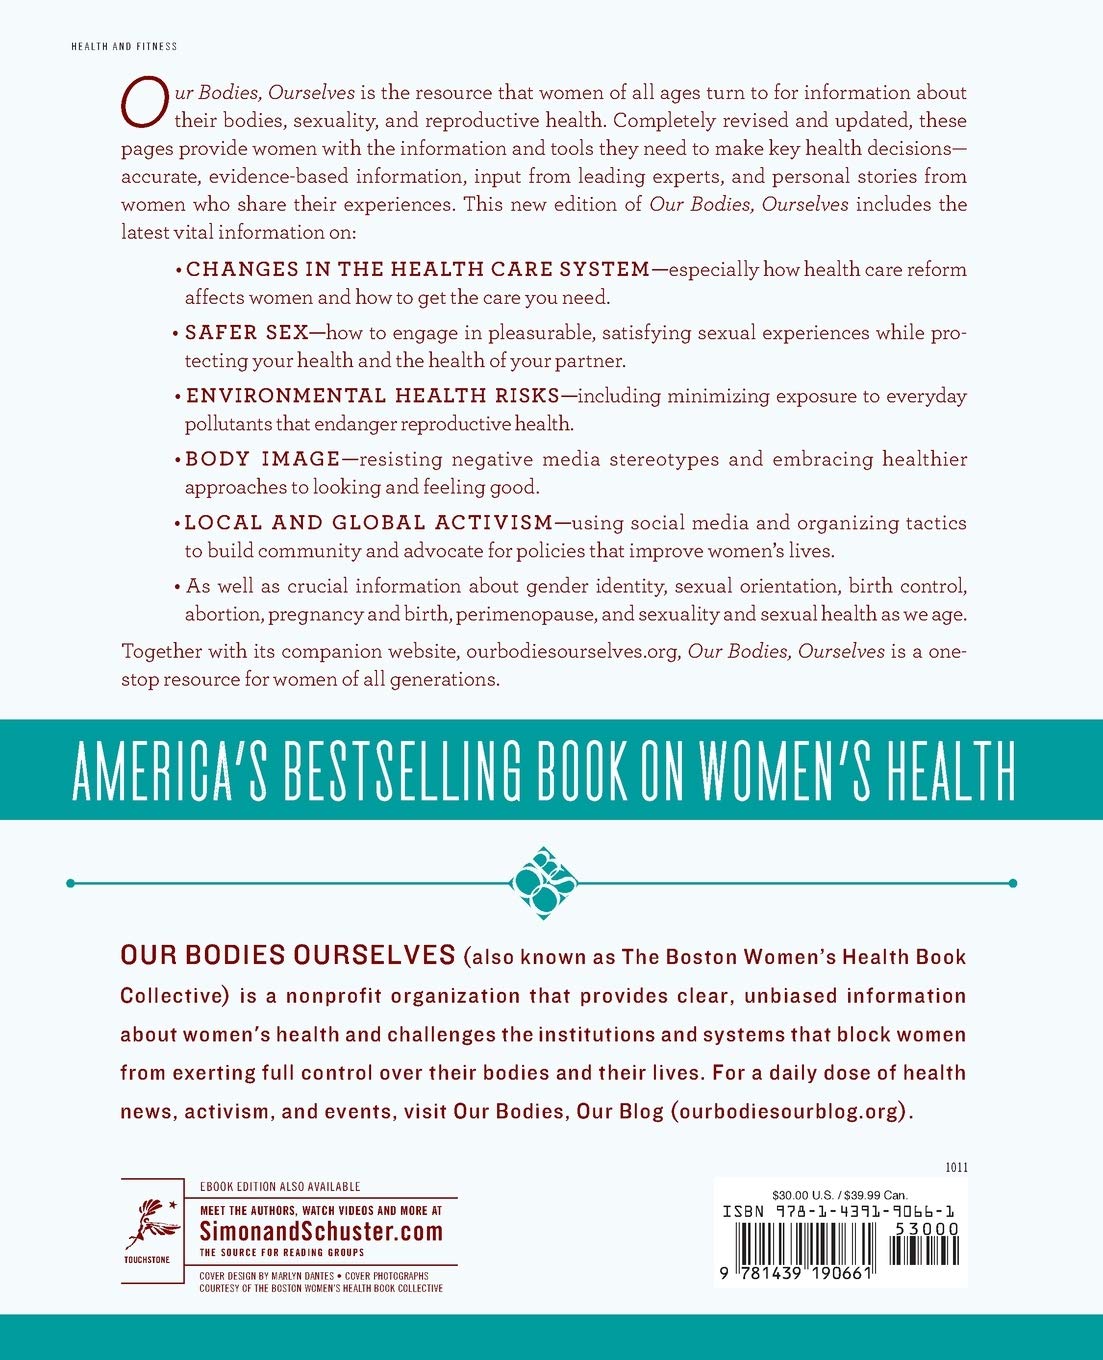 The back cover of Our Bodies, Ourselves: Revised and Updated (2011).